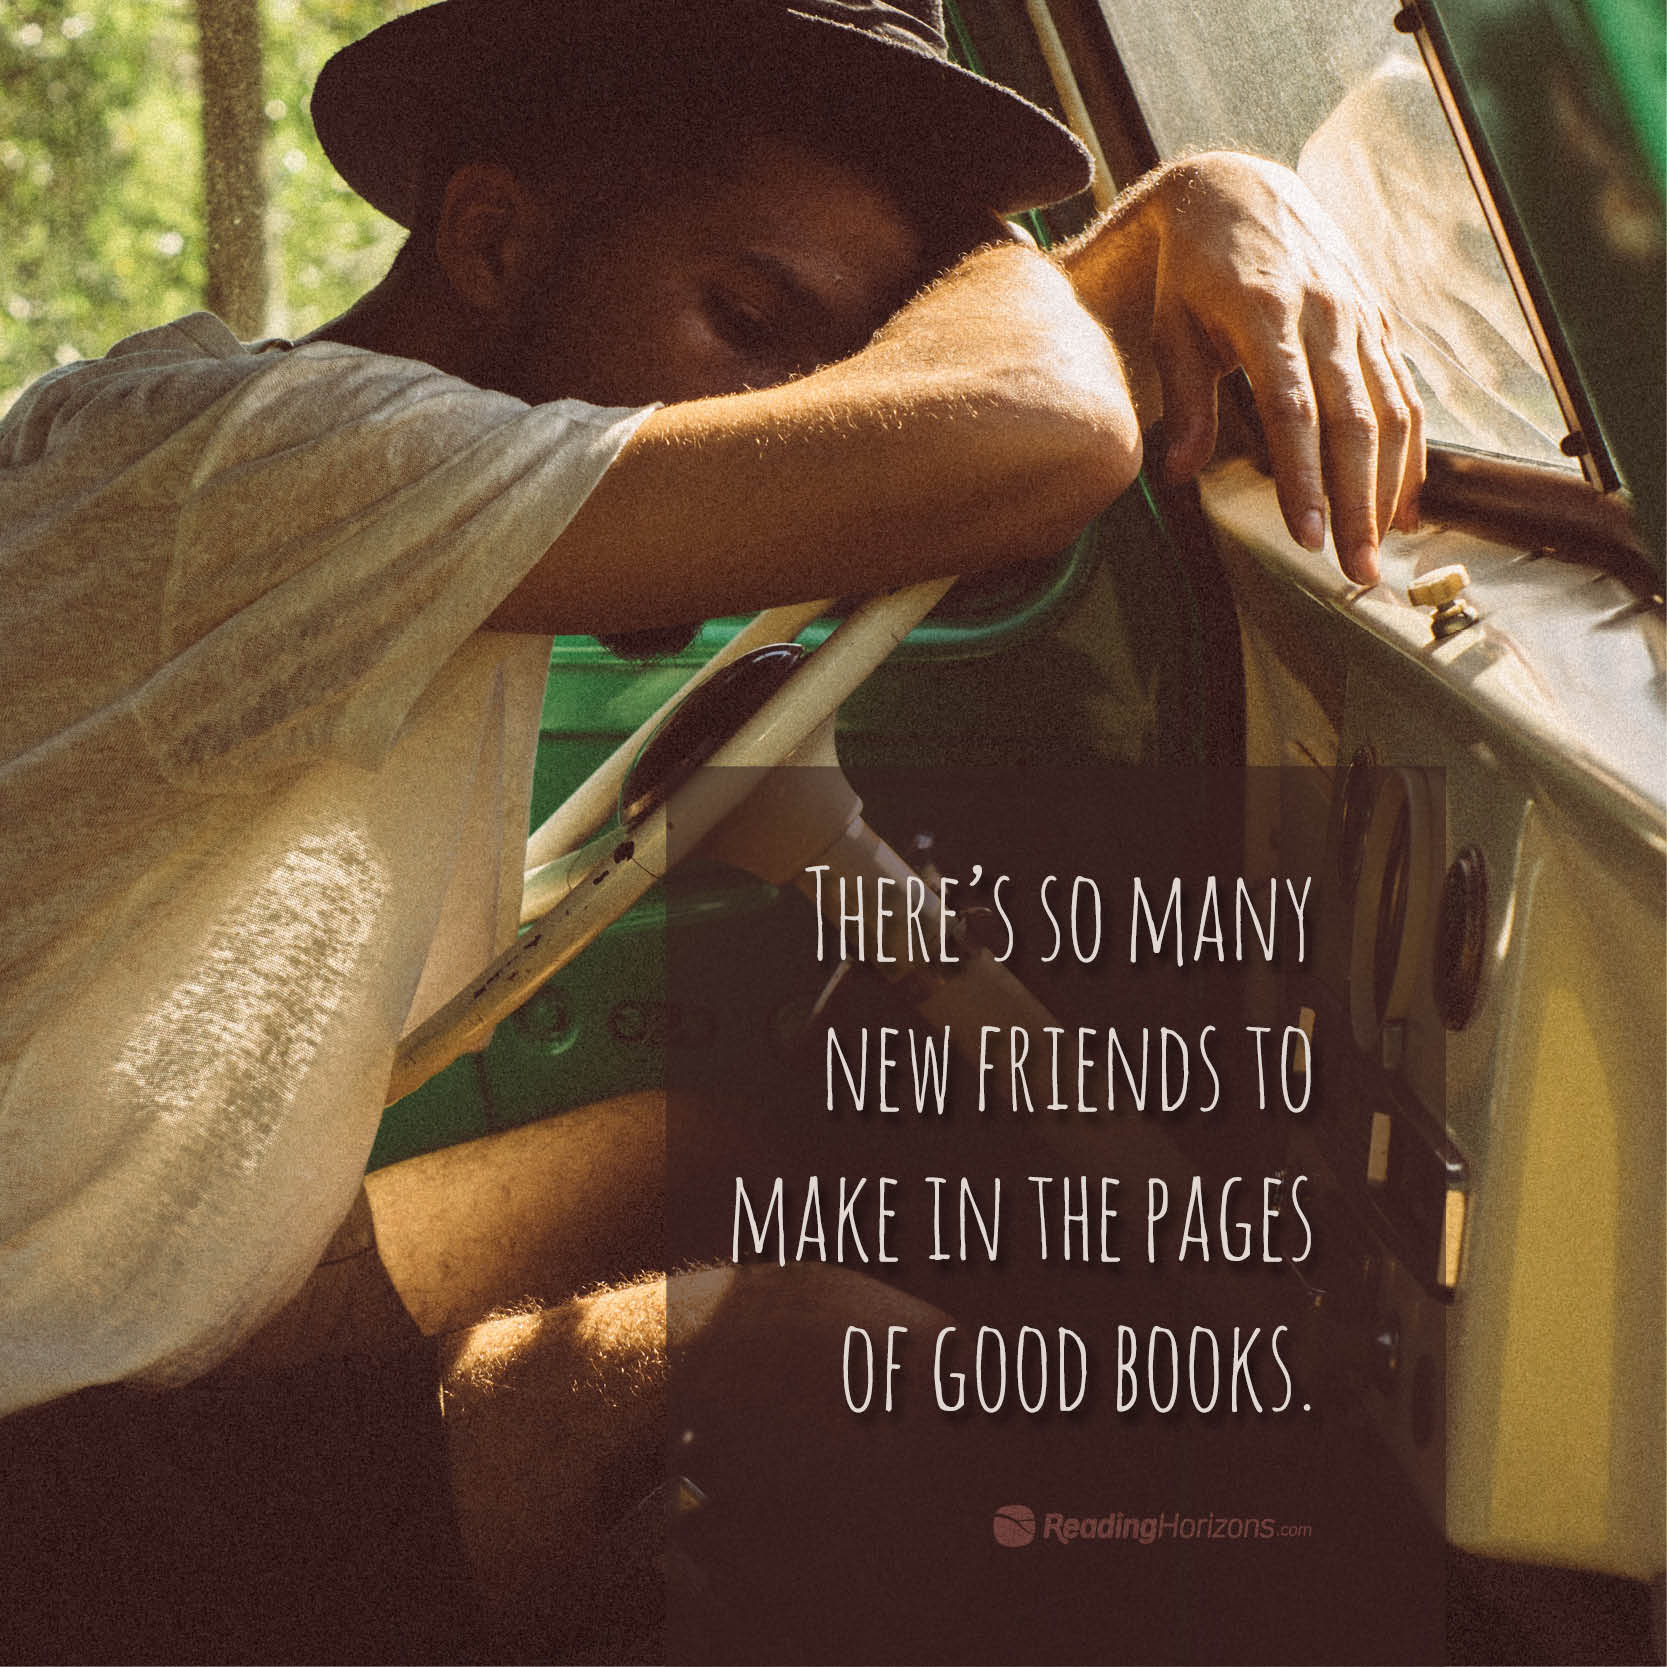 A meme of a young man wearing a hat lying his head on a steering wheel in a car with the words "There's so many new friends to make in the pages of good books."